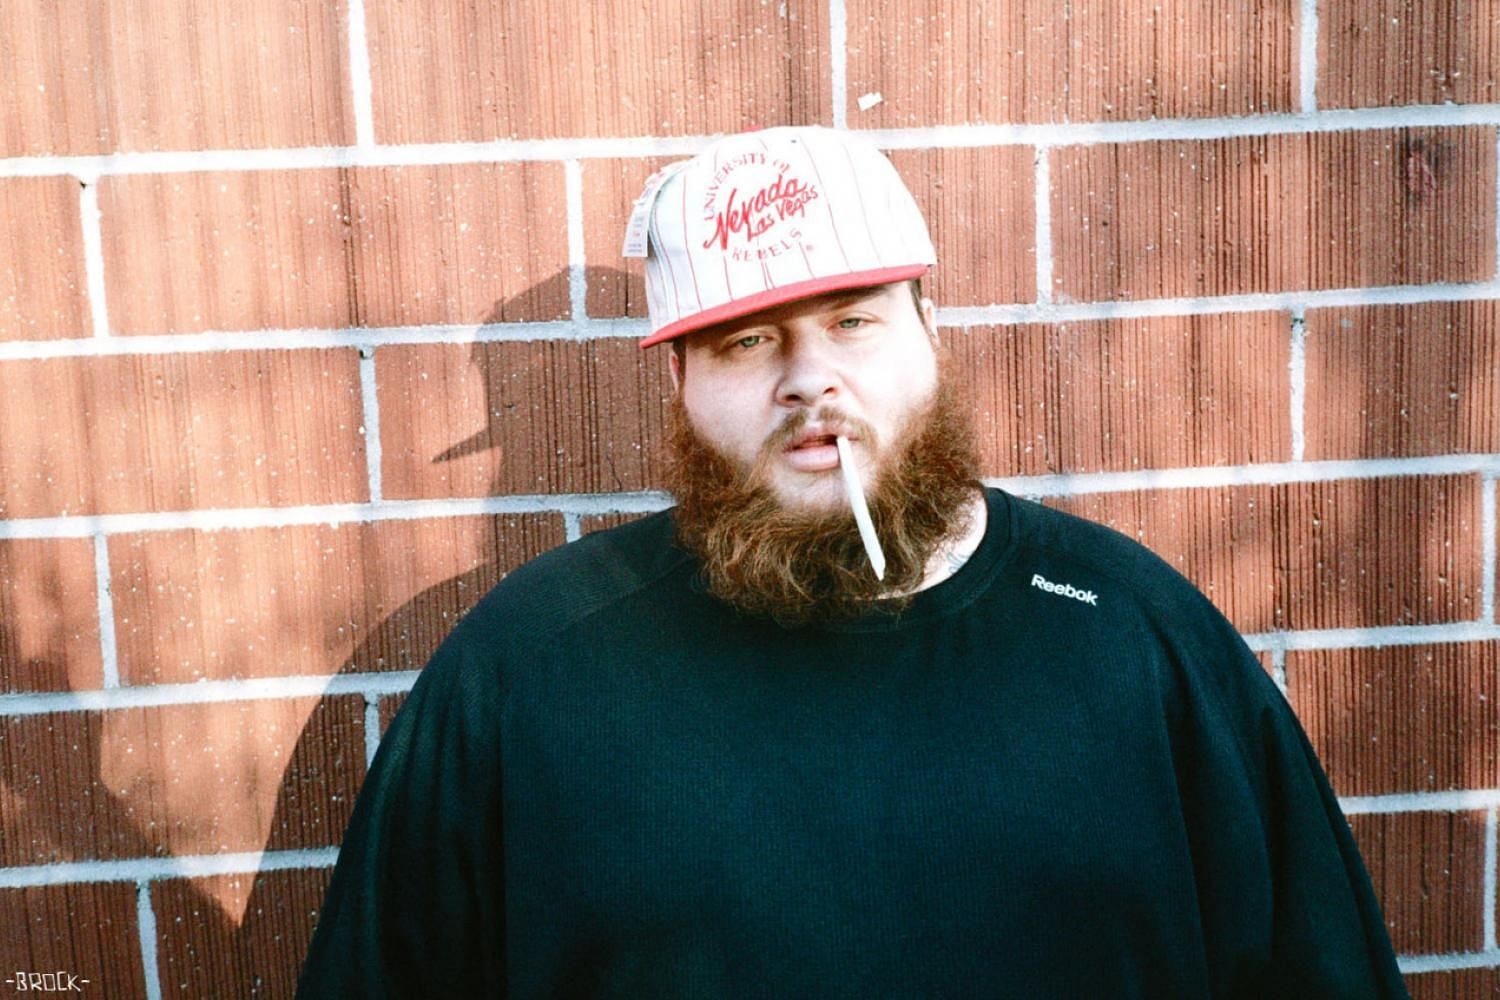 Action Bronson is a good friend of Taz.